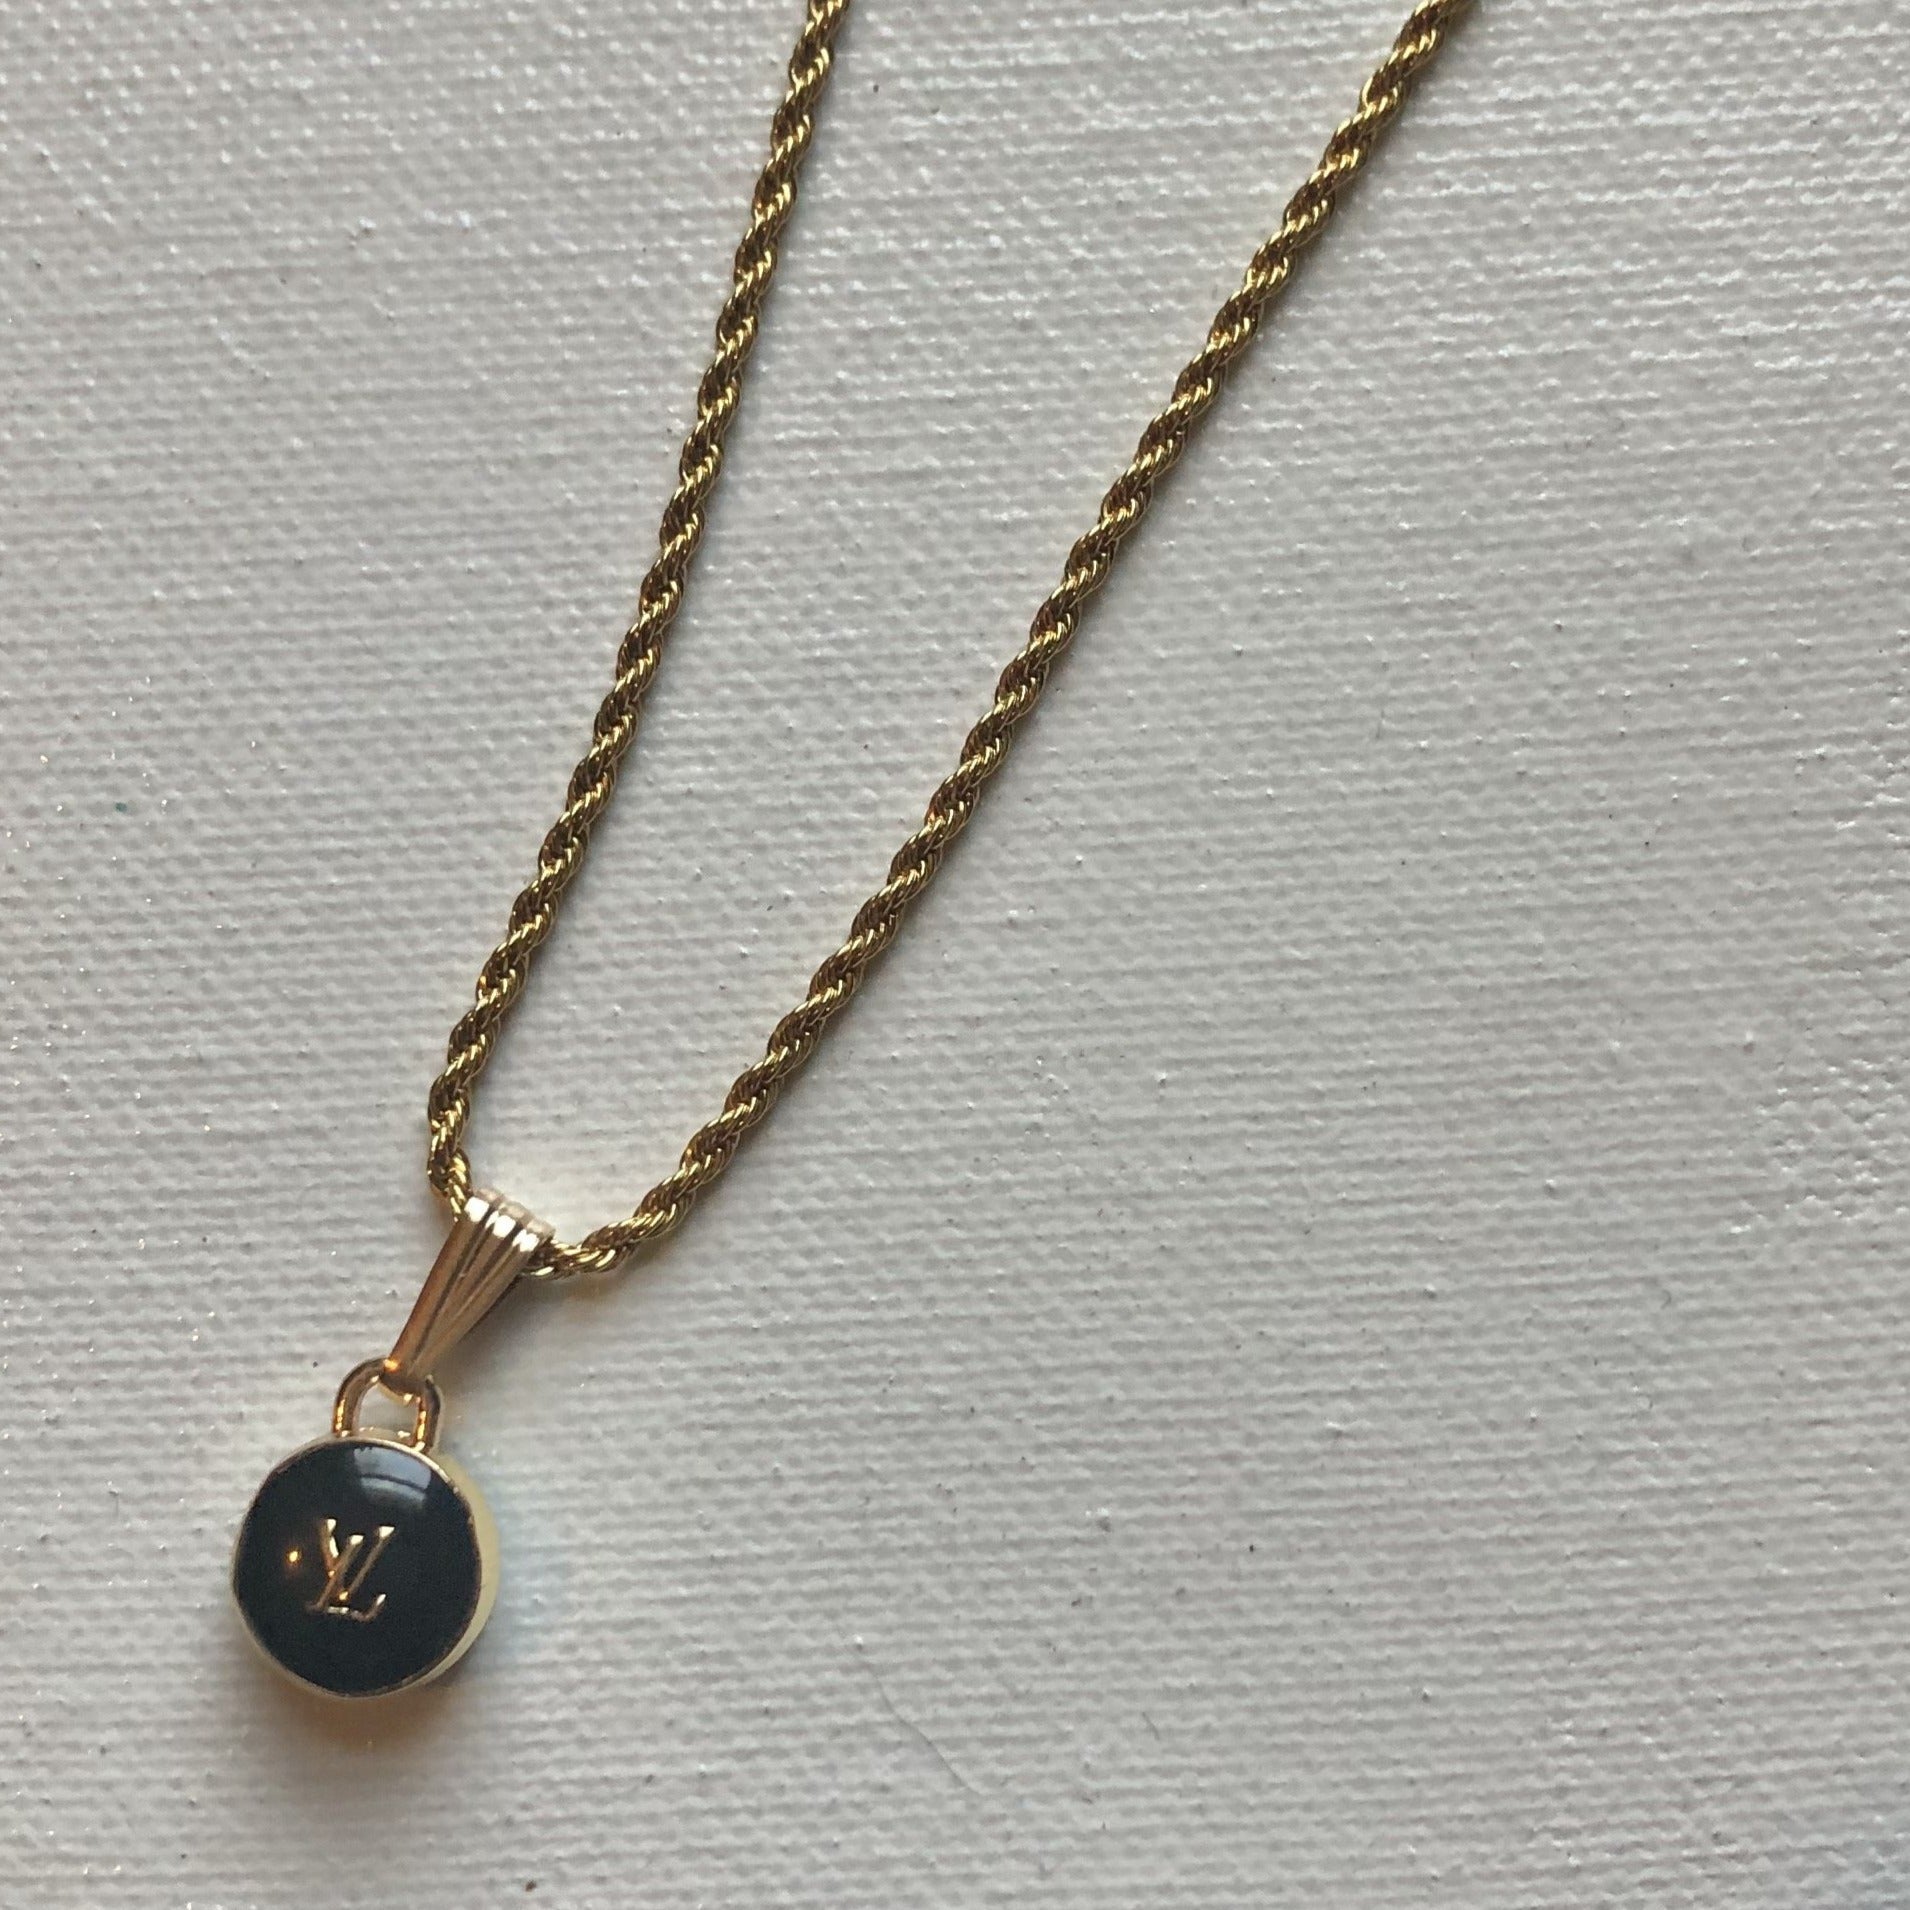 Black LV Button Necklace - Gold Filled Rope Chain